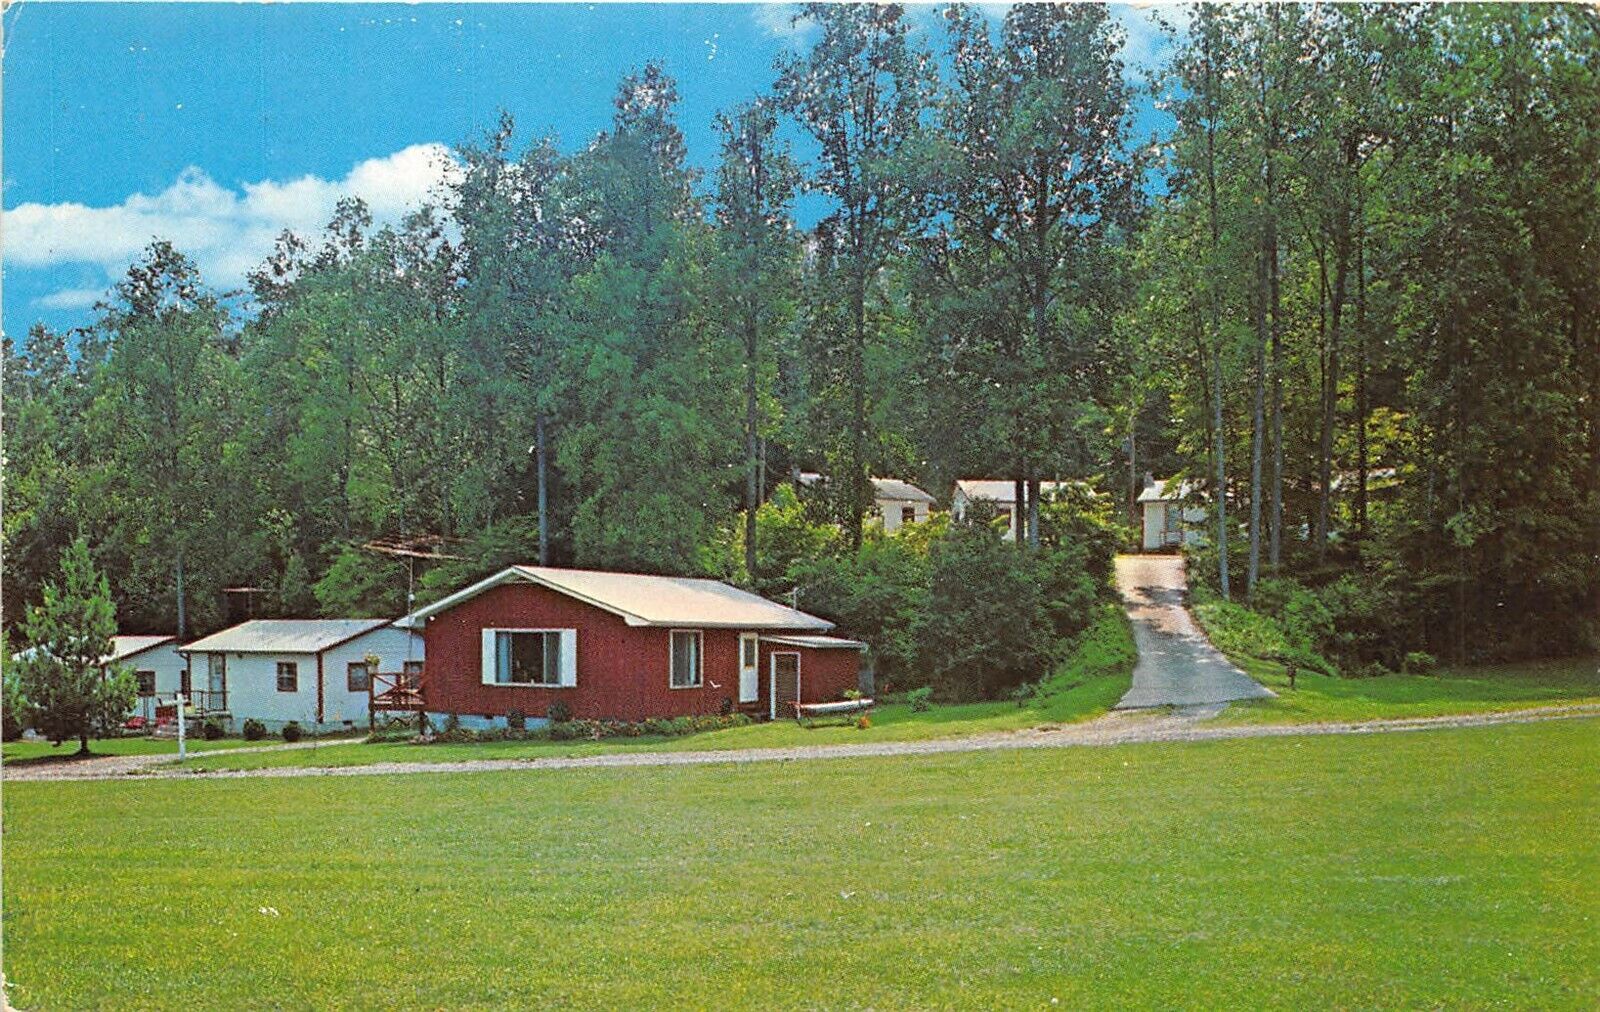 Franklin North Carolina 1977 Postcard Sleepy Hollow Cottages in Cowee Valley 